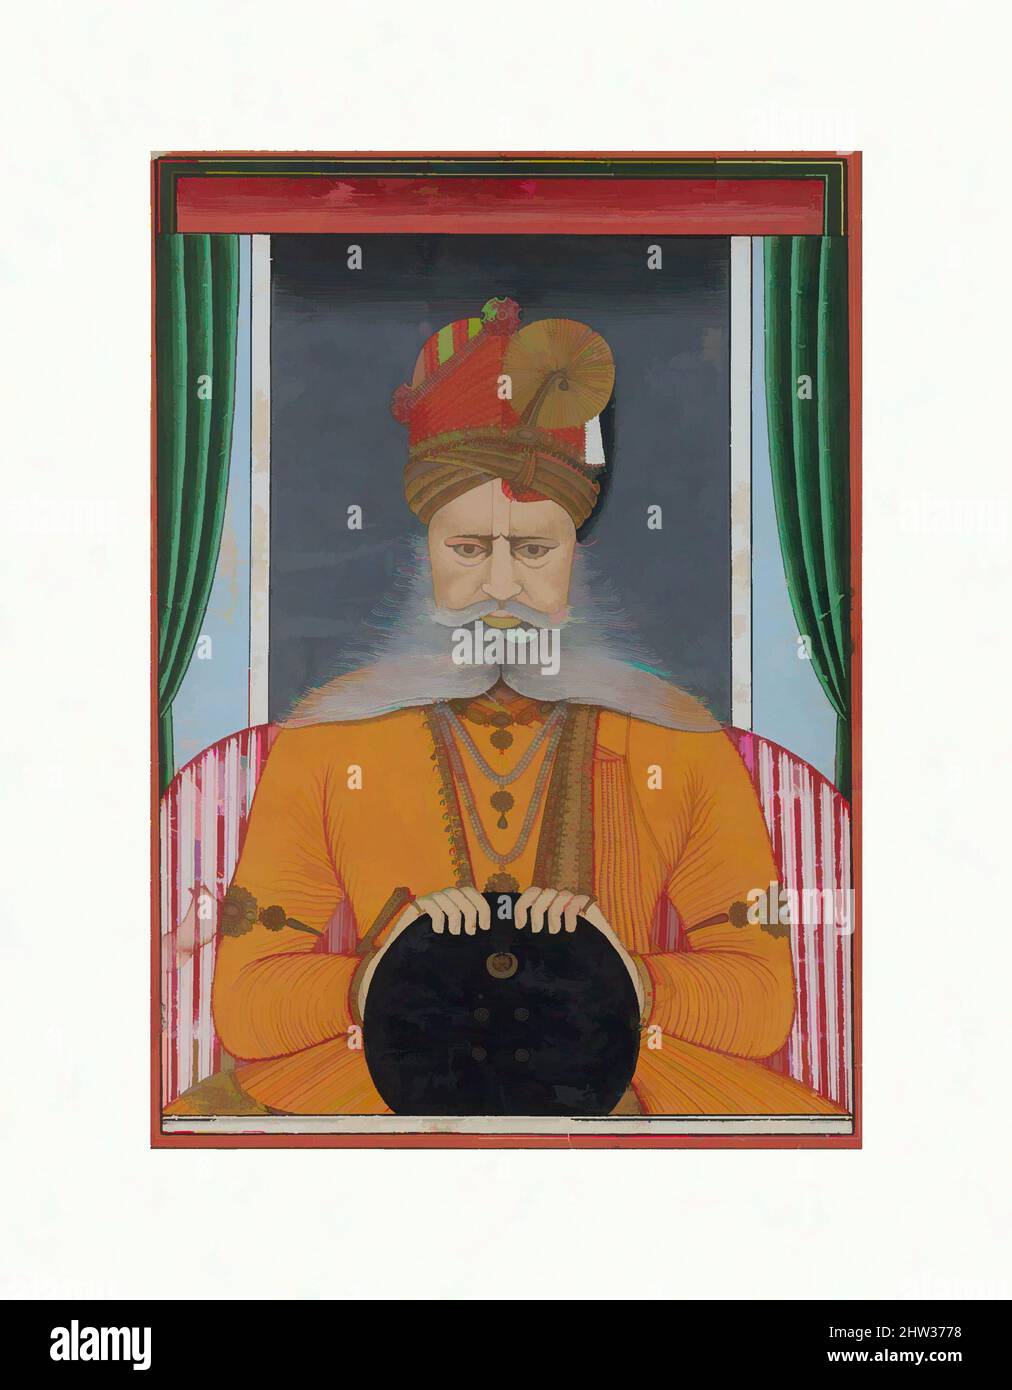 Art inspired by Maharaja Sardar Singh of Bikaner, ca. 1860–70, India (Rajasthan, Bikaner), Opaque watercolor, ink, and gold on paper, 16 x 12 in. (40.6 x 30.5 cm), Paintings, Chotu, Maharaja Sardar Singh (r. 1851–72) is captured here in an extraordinary portrait whose creator was, Classic works modernized by Artotop with a splash of modernity. Shapes, color and value, eye-catching visual impact on art. Emotions through freedom of artworks in a contemporary way. A timeless message pursuing a wildly creative new direction. Artists turning to the digital medium and creating the Artotop NFT Stock Photo